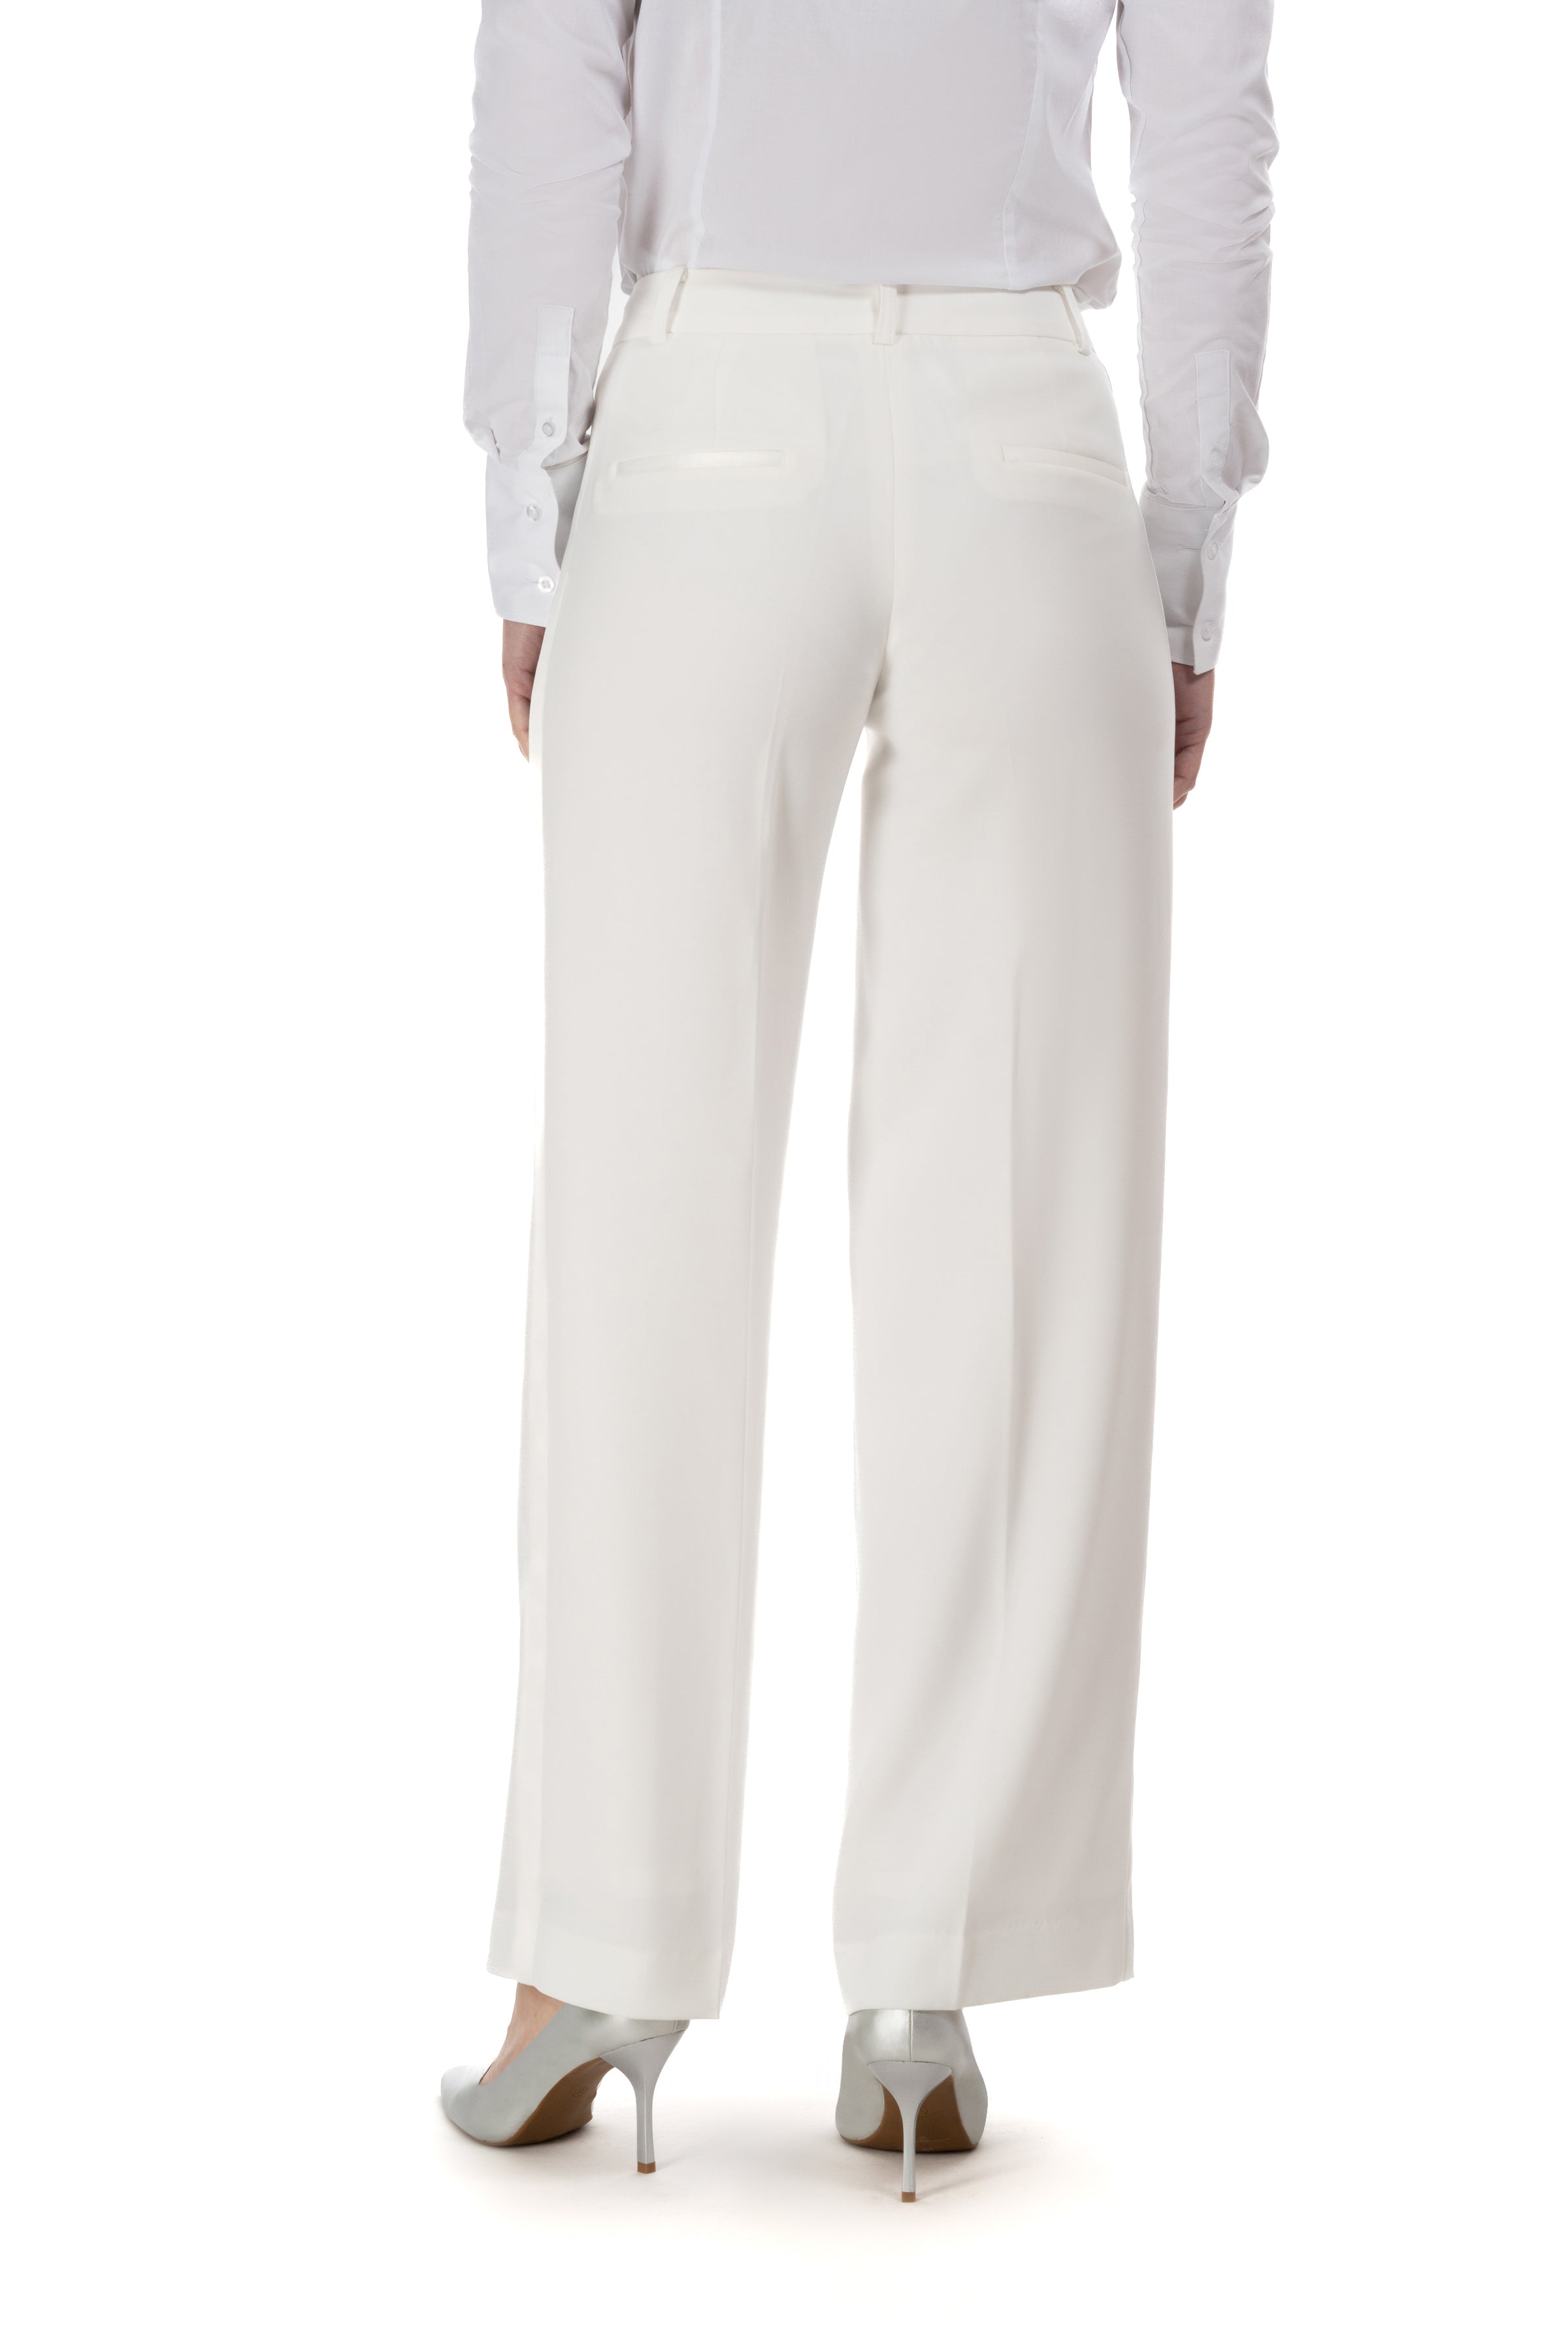 Pearl White Straight Wide Fit Tuxedo Pants w/ Satin Back Pocket